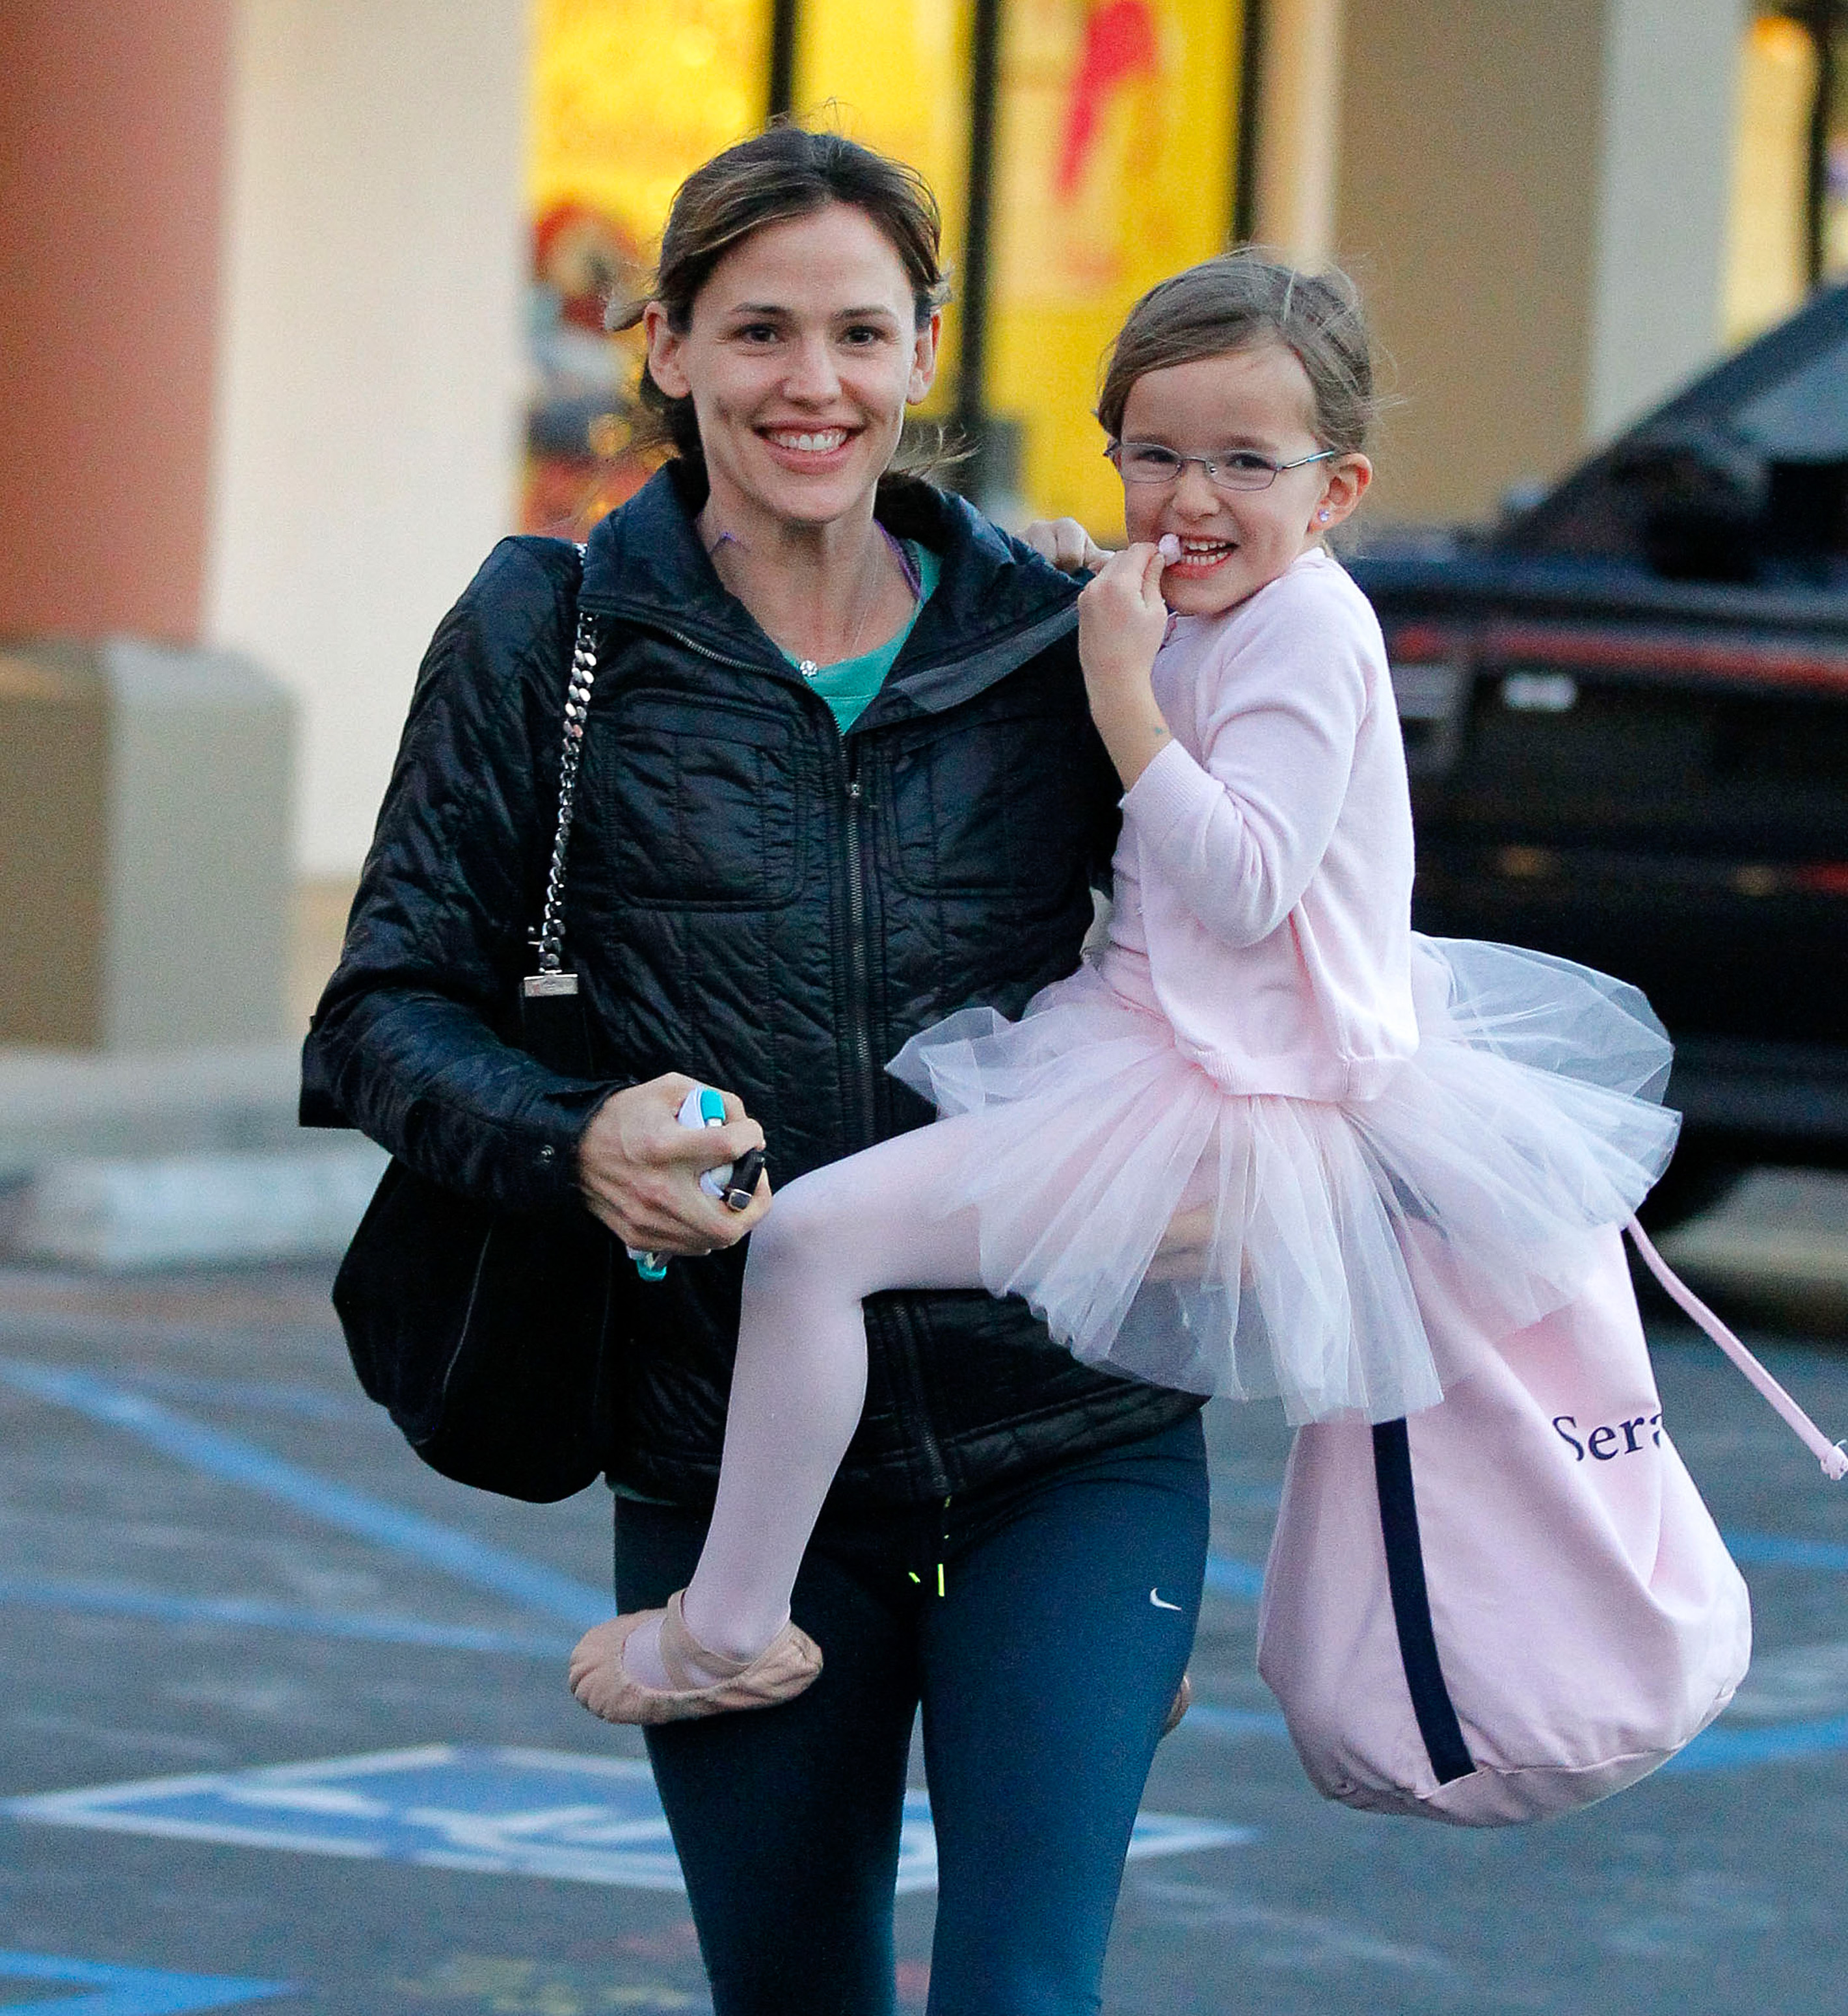 Jennifer Garner and Seraphina Affleck on December 13, 2013, in Los Angeles, California | Source: Getty Images